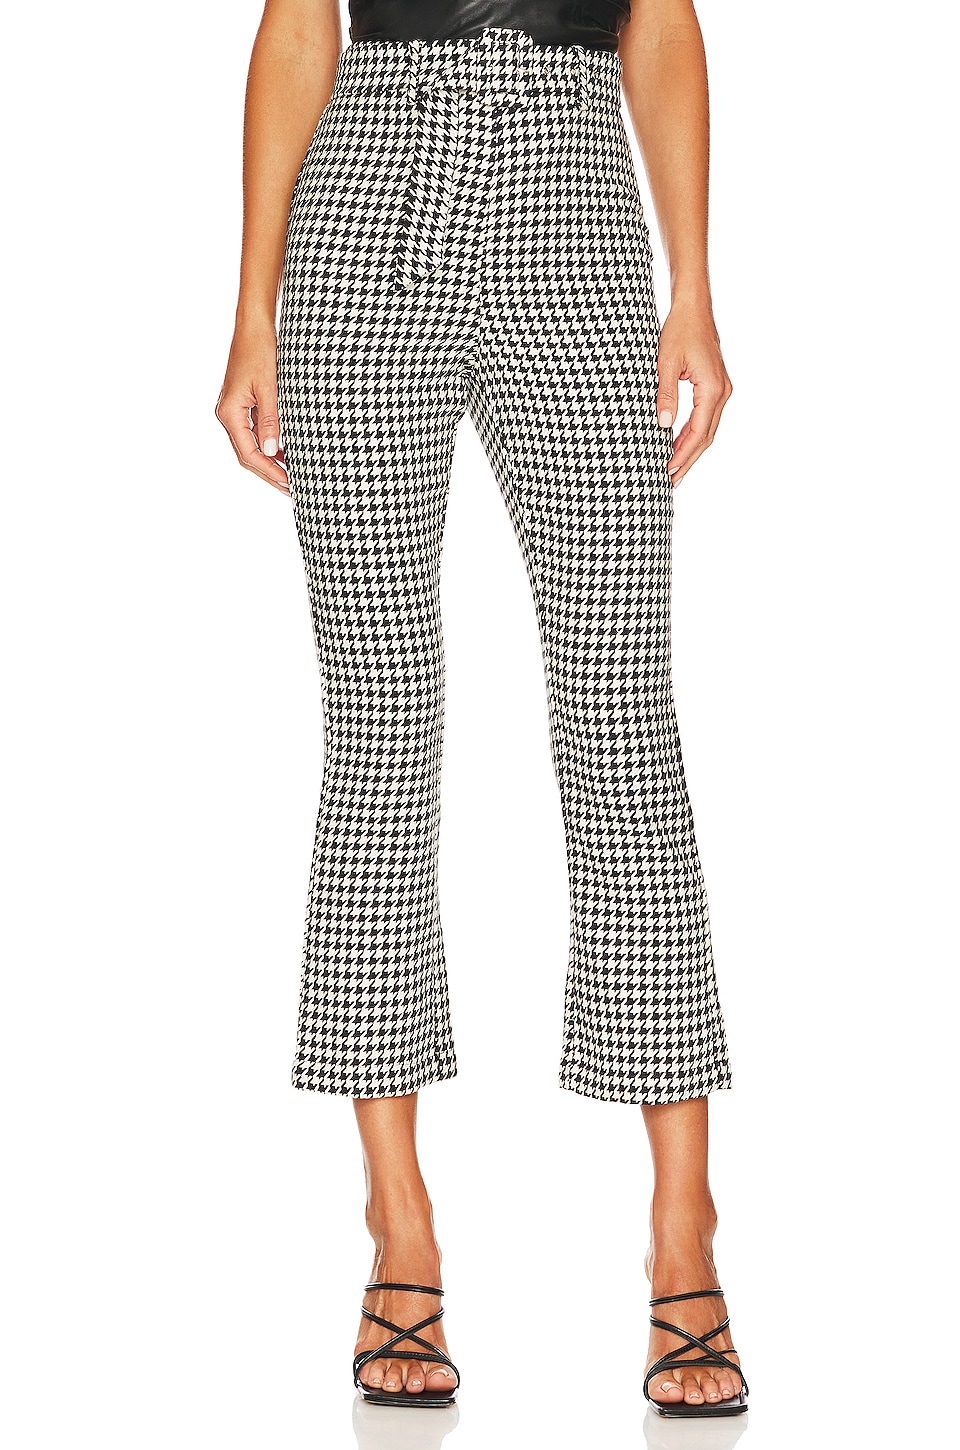 Брюки MAJORELLE Jayla, цвет Houndstooth houndstooth knitted women